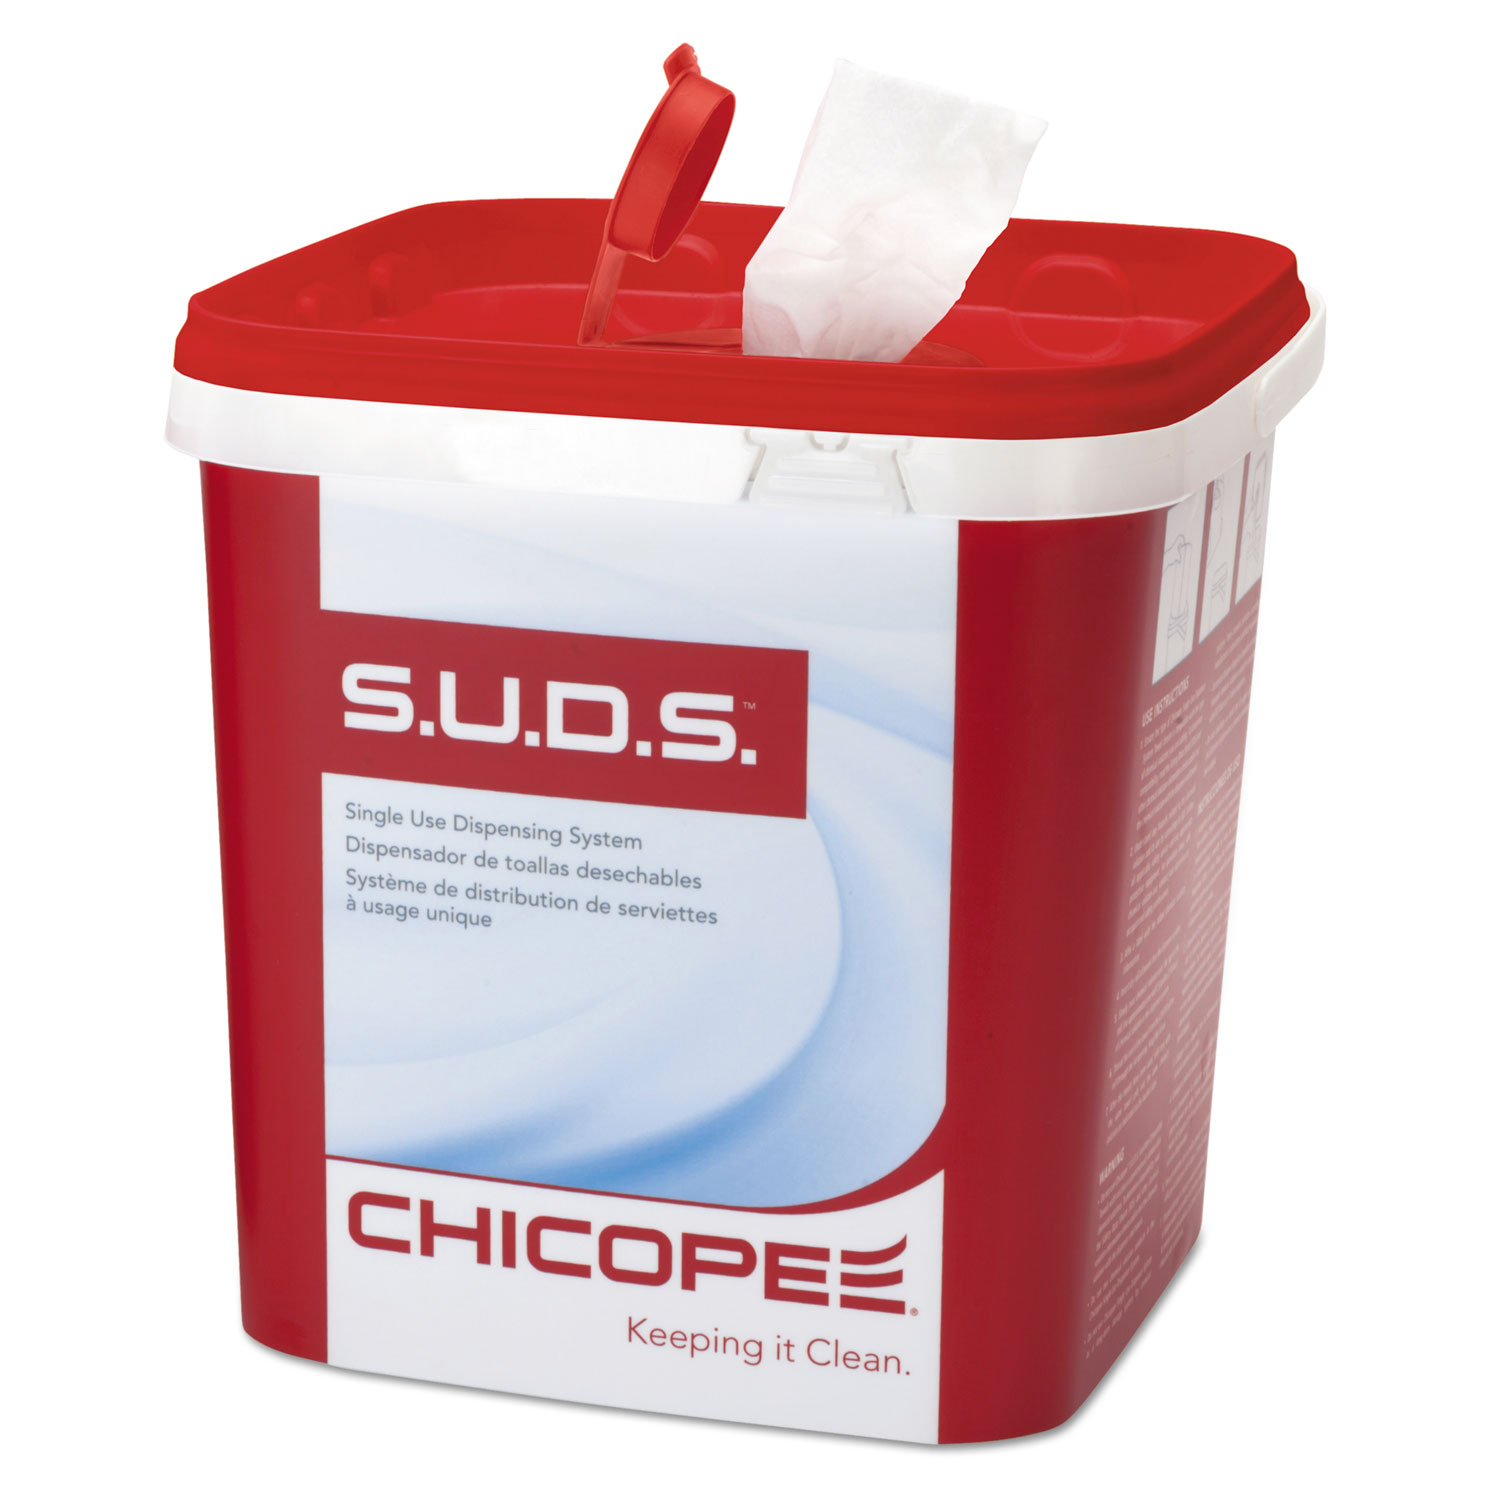  Chicopee 0721 S.U.D.S. Single Use Dispensing System Towels For Quat, 10 x 12, 110/Roll, 6 Rolls and 1 Dispenser/Carton (CHI0721) 